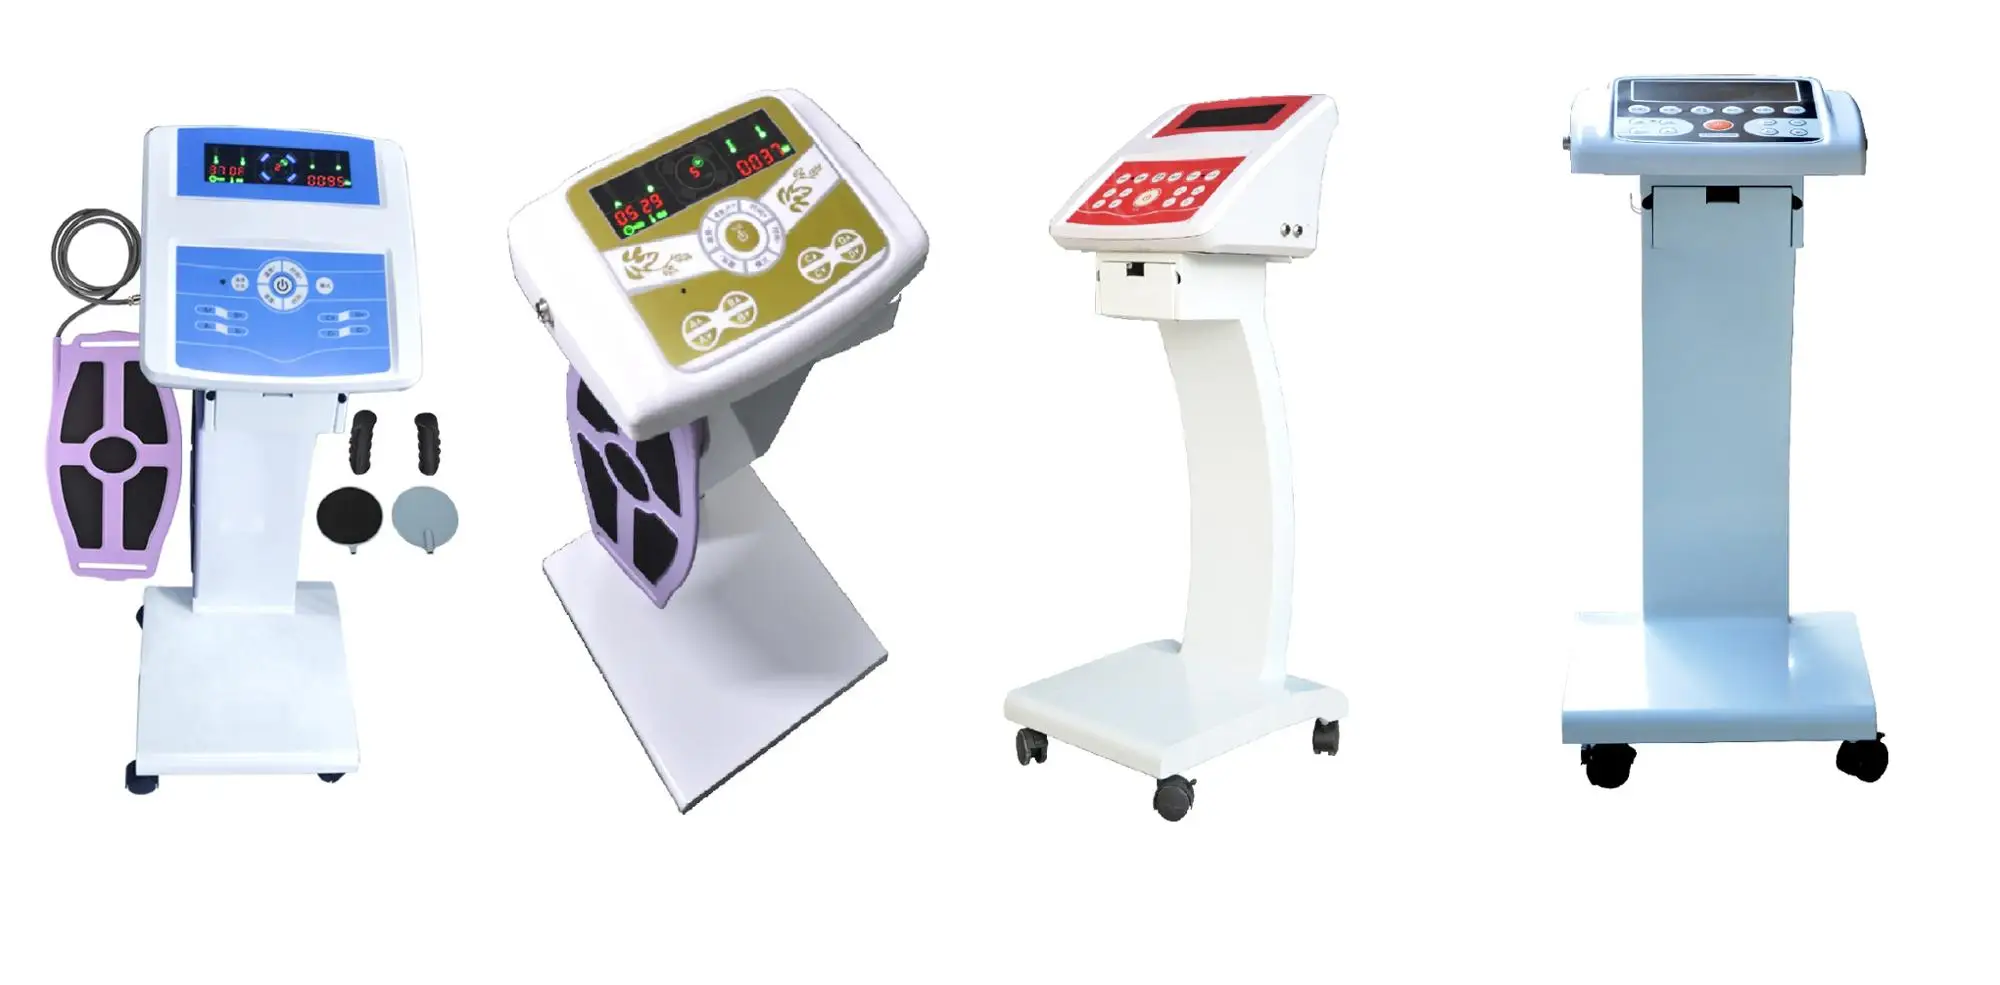 High Quality Far Infrared EMS Massage Pulse Wave Vibrator Machine For Joint Pain Relief Body Care SUNGPO Factory